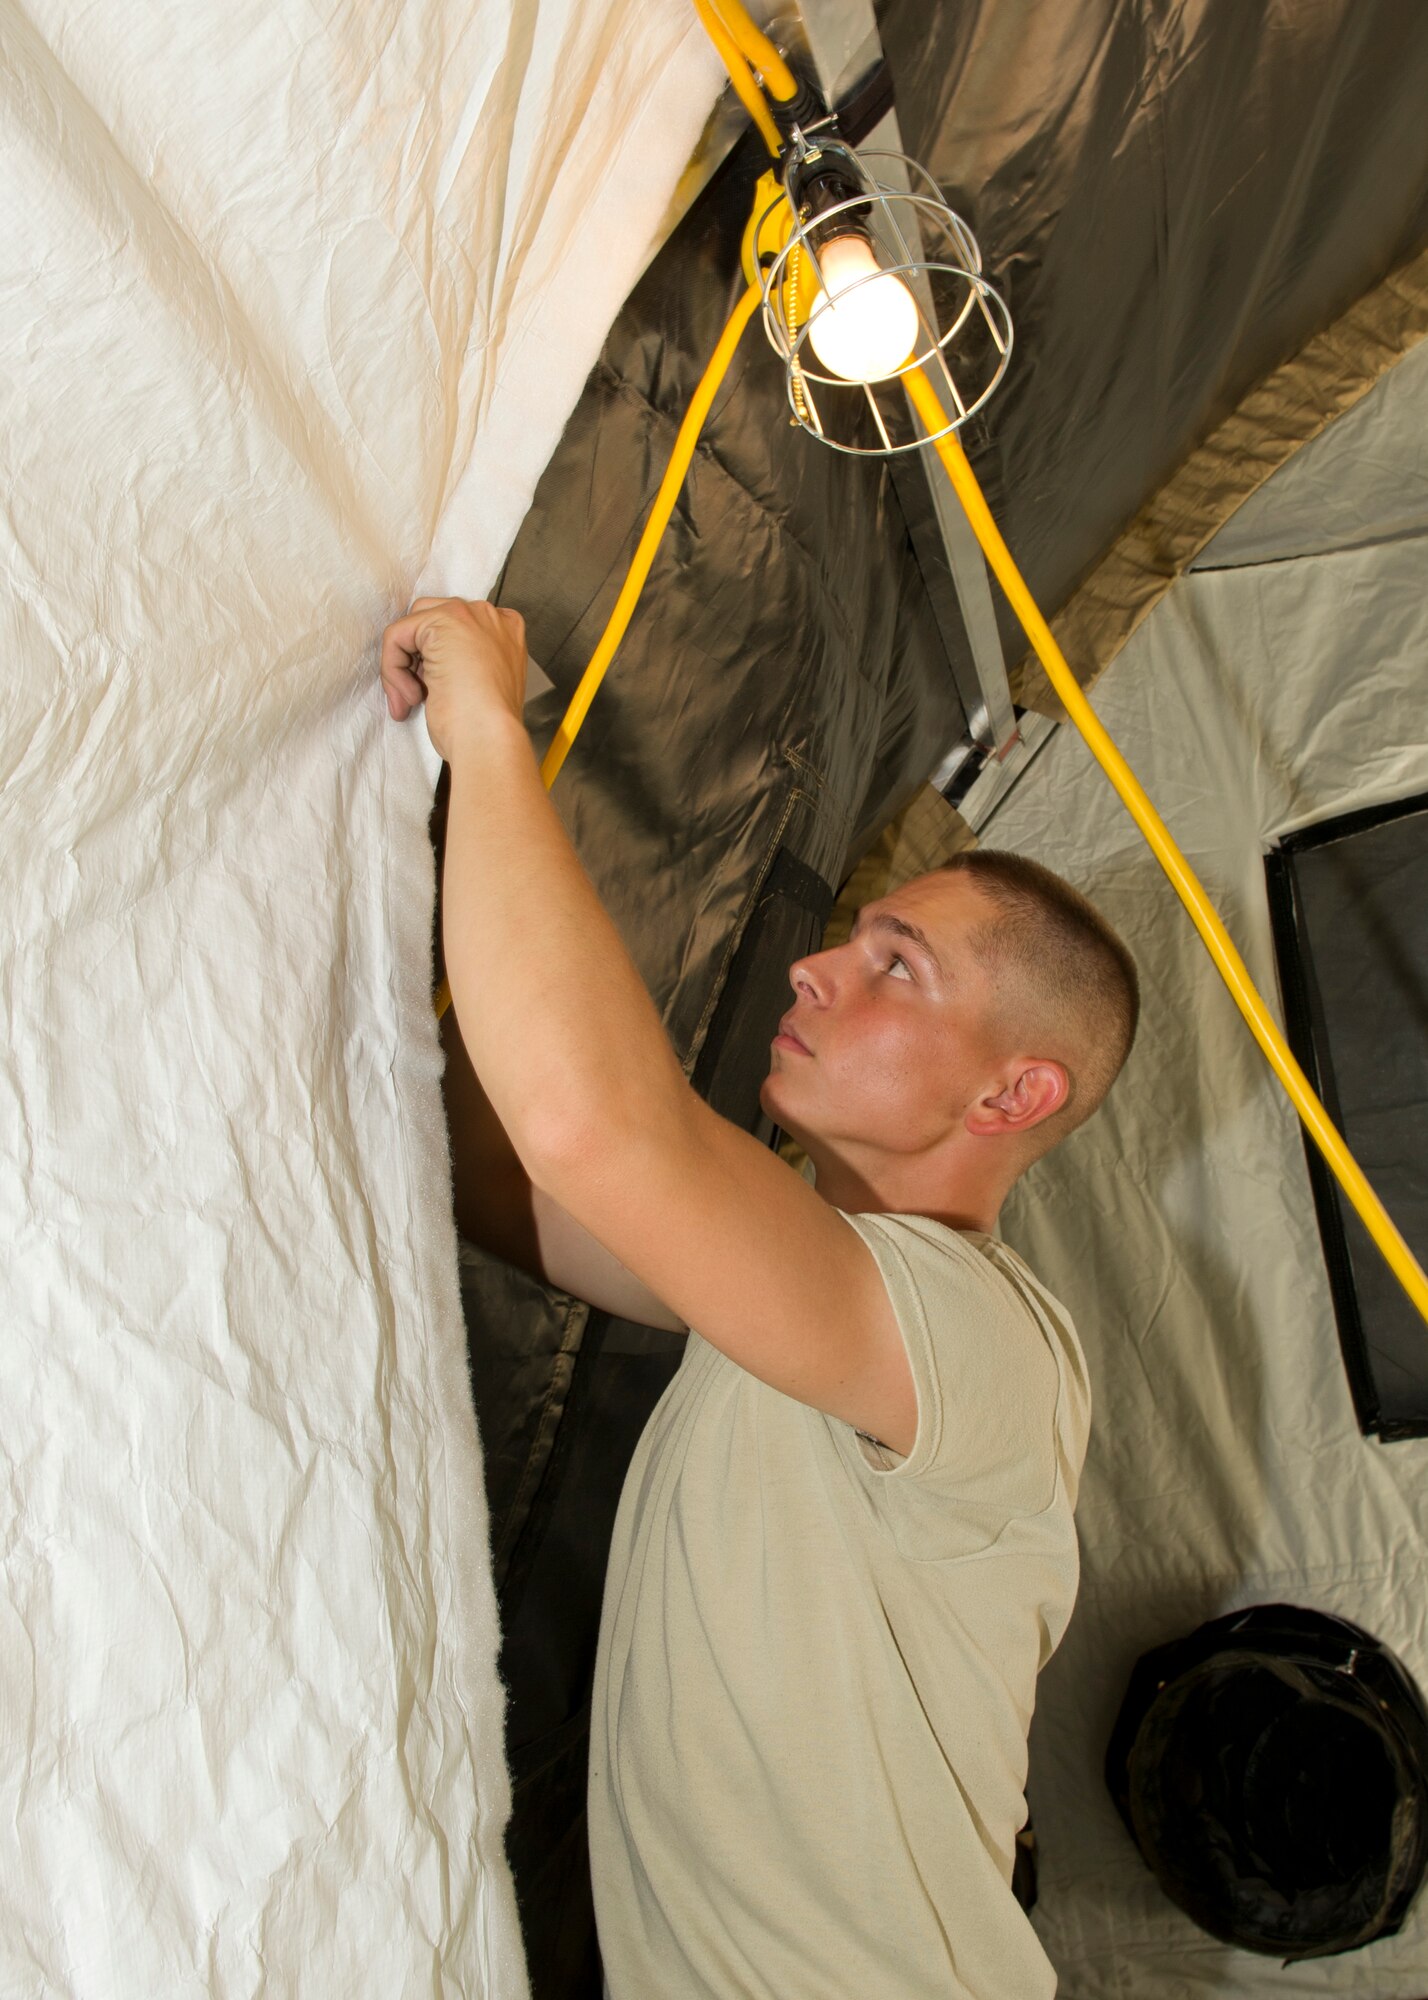 Airman 1st Class Bryce Bigboy, 49th Materiel Maintenance Squadron structural apprentice, attaches a liner to a small shelter tent during a Basic Expeditionary Airfield Resources Base five-day training exercise at Holloman Air Force Base, N.M., July 10. The liner adds an additional layer to protect occupants from hot or cold weather conditions. (U.S. Air Force photo by Senior Airman Kasey Close/Released)